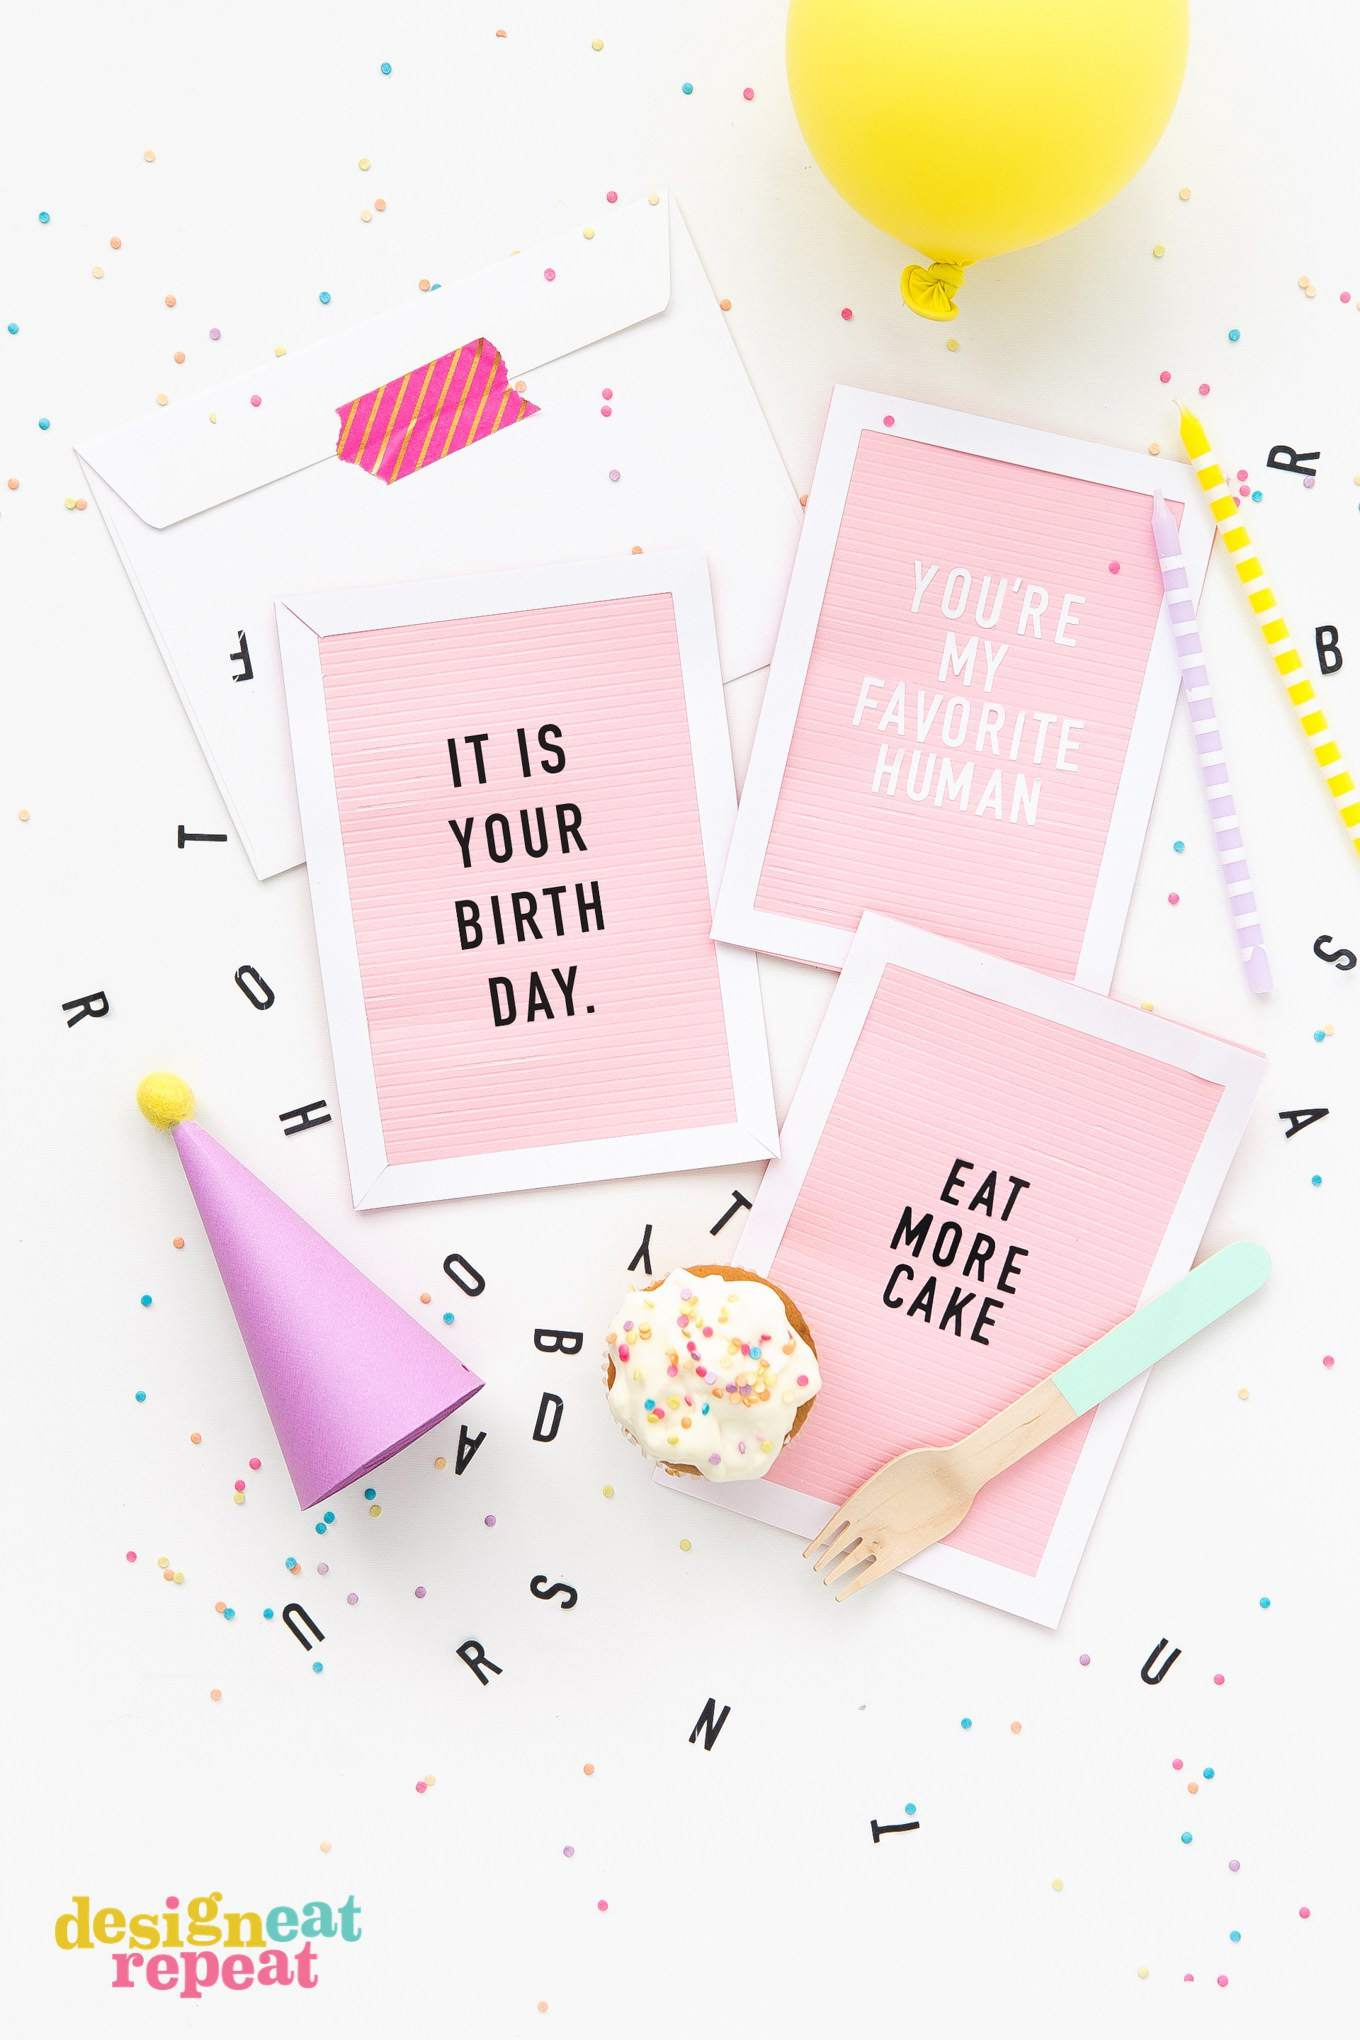 Handmade Birthday Card Ideas For Girlfriend Get Inspiration From 25 Of The Best Diy Birthday Cards